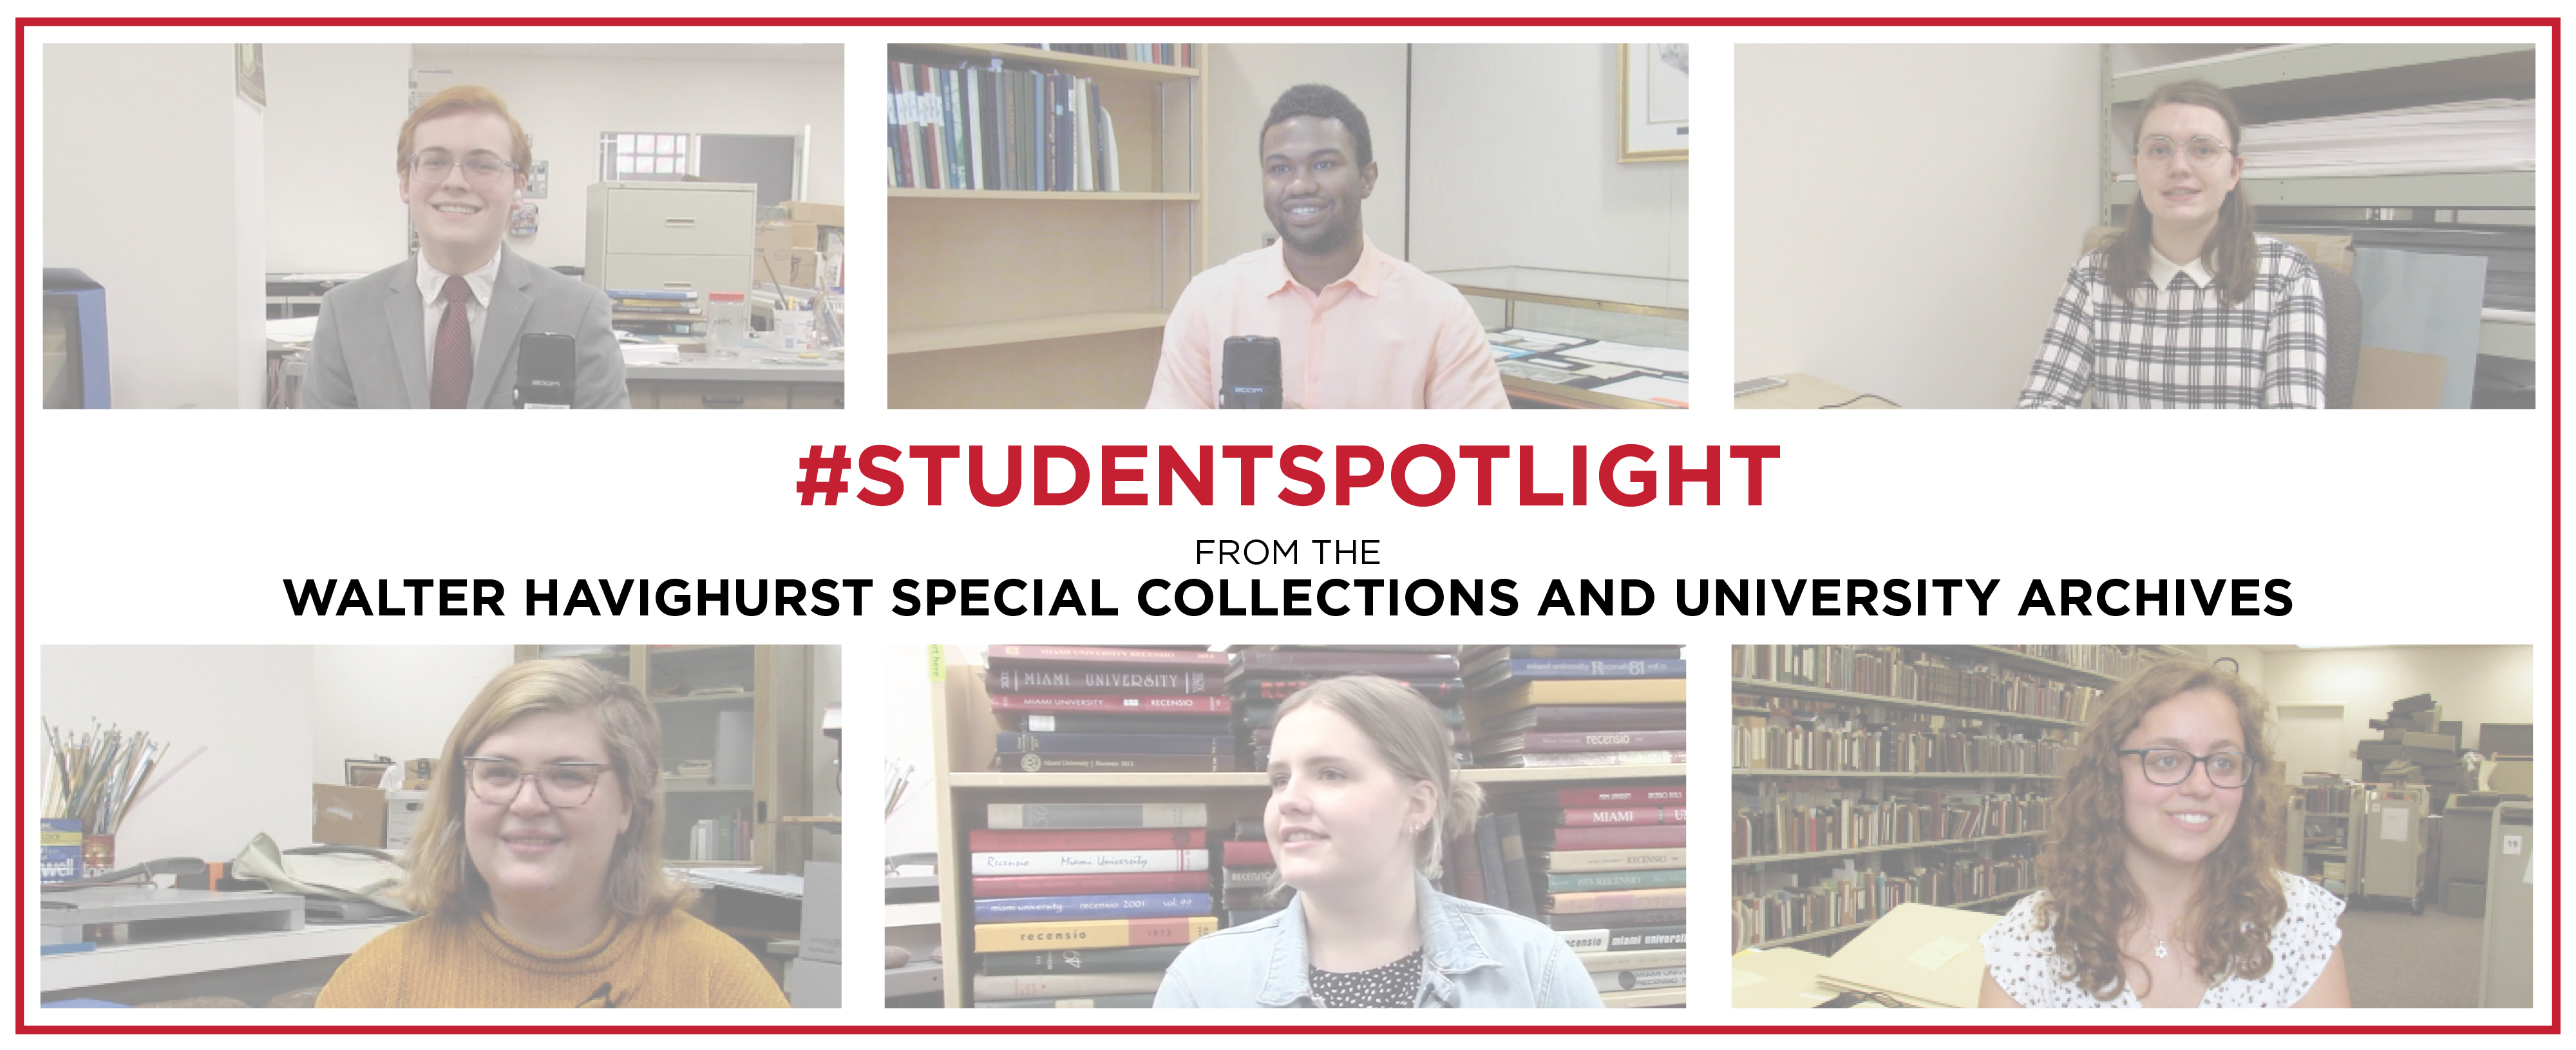 6 students are featured with the title #StudentSpotlights. Pictured clockwise: Alex Cox, Carson Minter, Megan Snyder, Emily Garforth, Anna Gyde, and Abby Lebovitz.